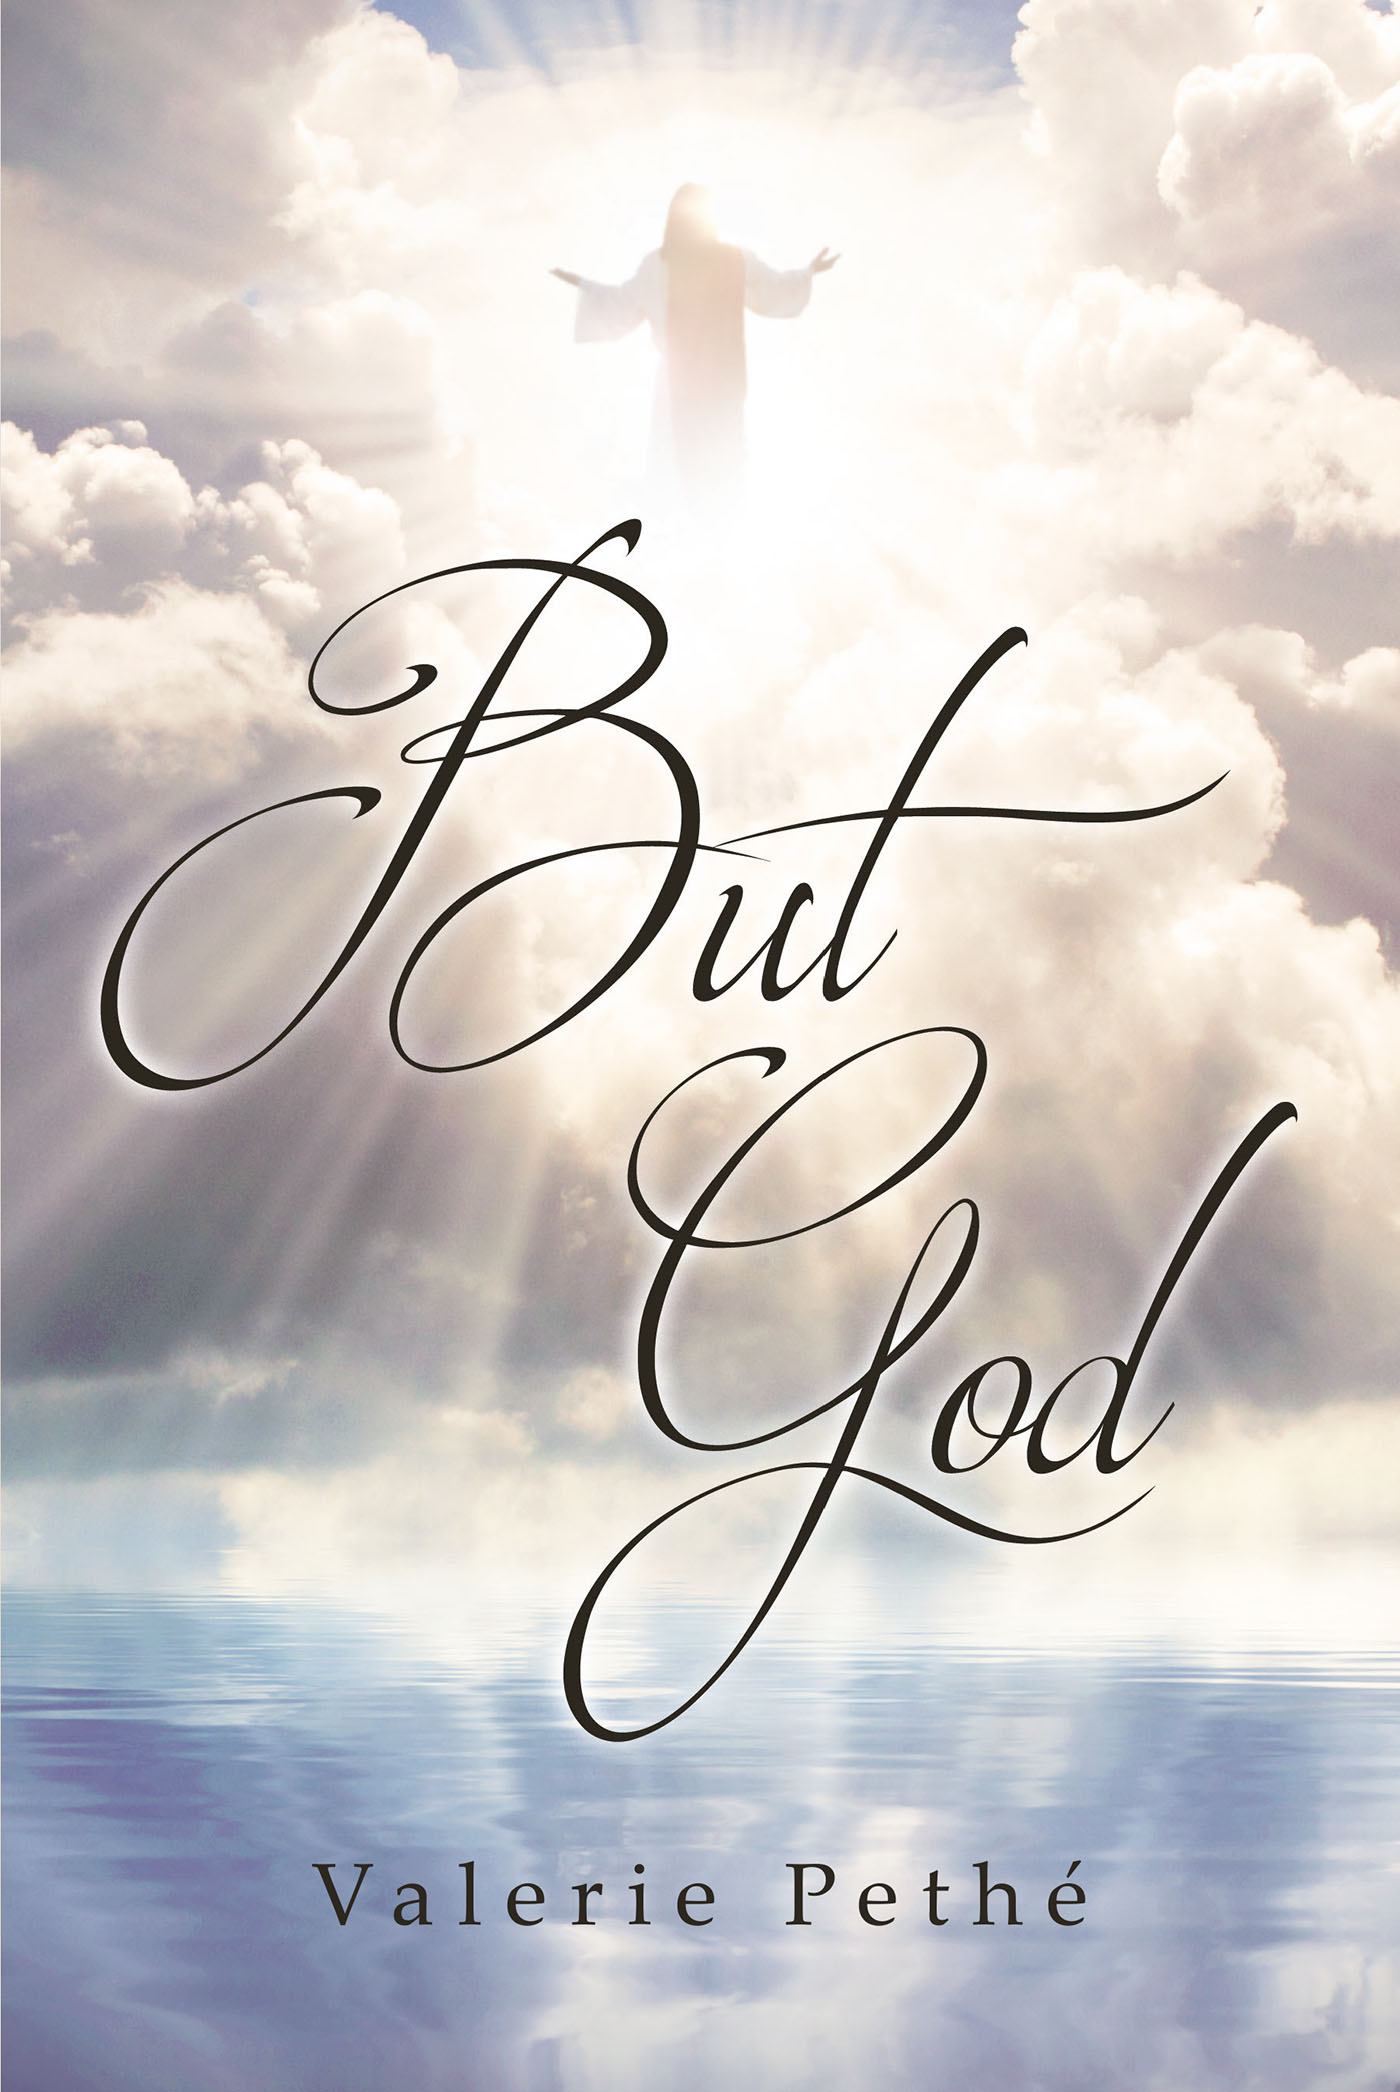 Author Valerie Pethé’s New Book, "But God," is a Faith-Based Read That Chronicles the Trials the Author Has Endured in Her Life and How the Lord Helped Her Through It All